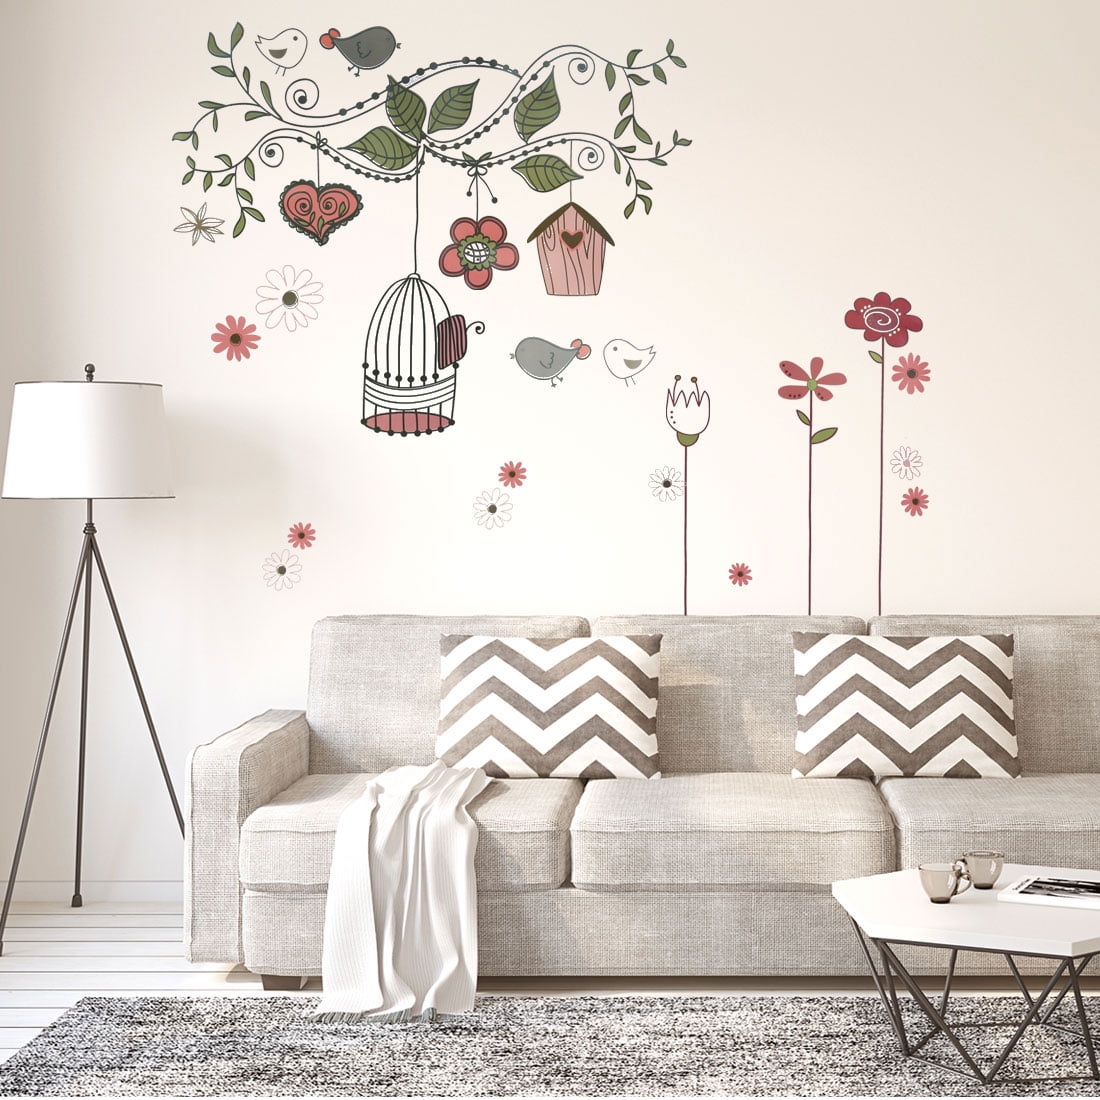 32 Colours 5 Sizes Self Adhesive Vinyl Wall Art Decal Easy to Apply Interior or Exterior use Horse Dream Catcher -0886